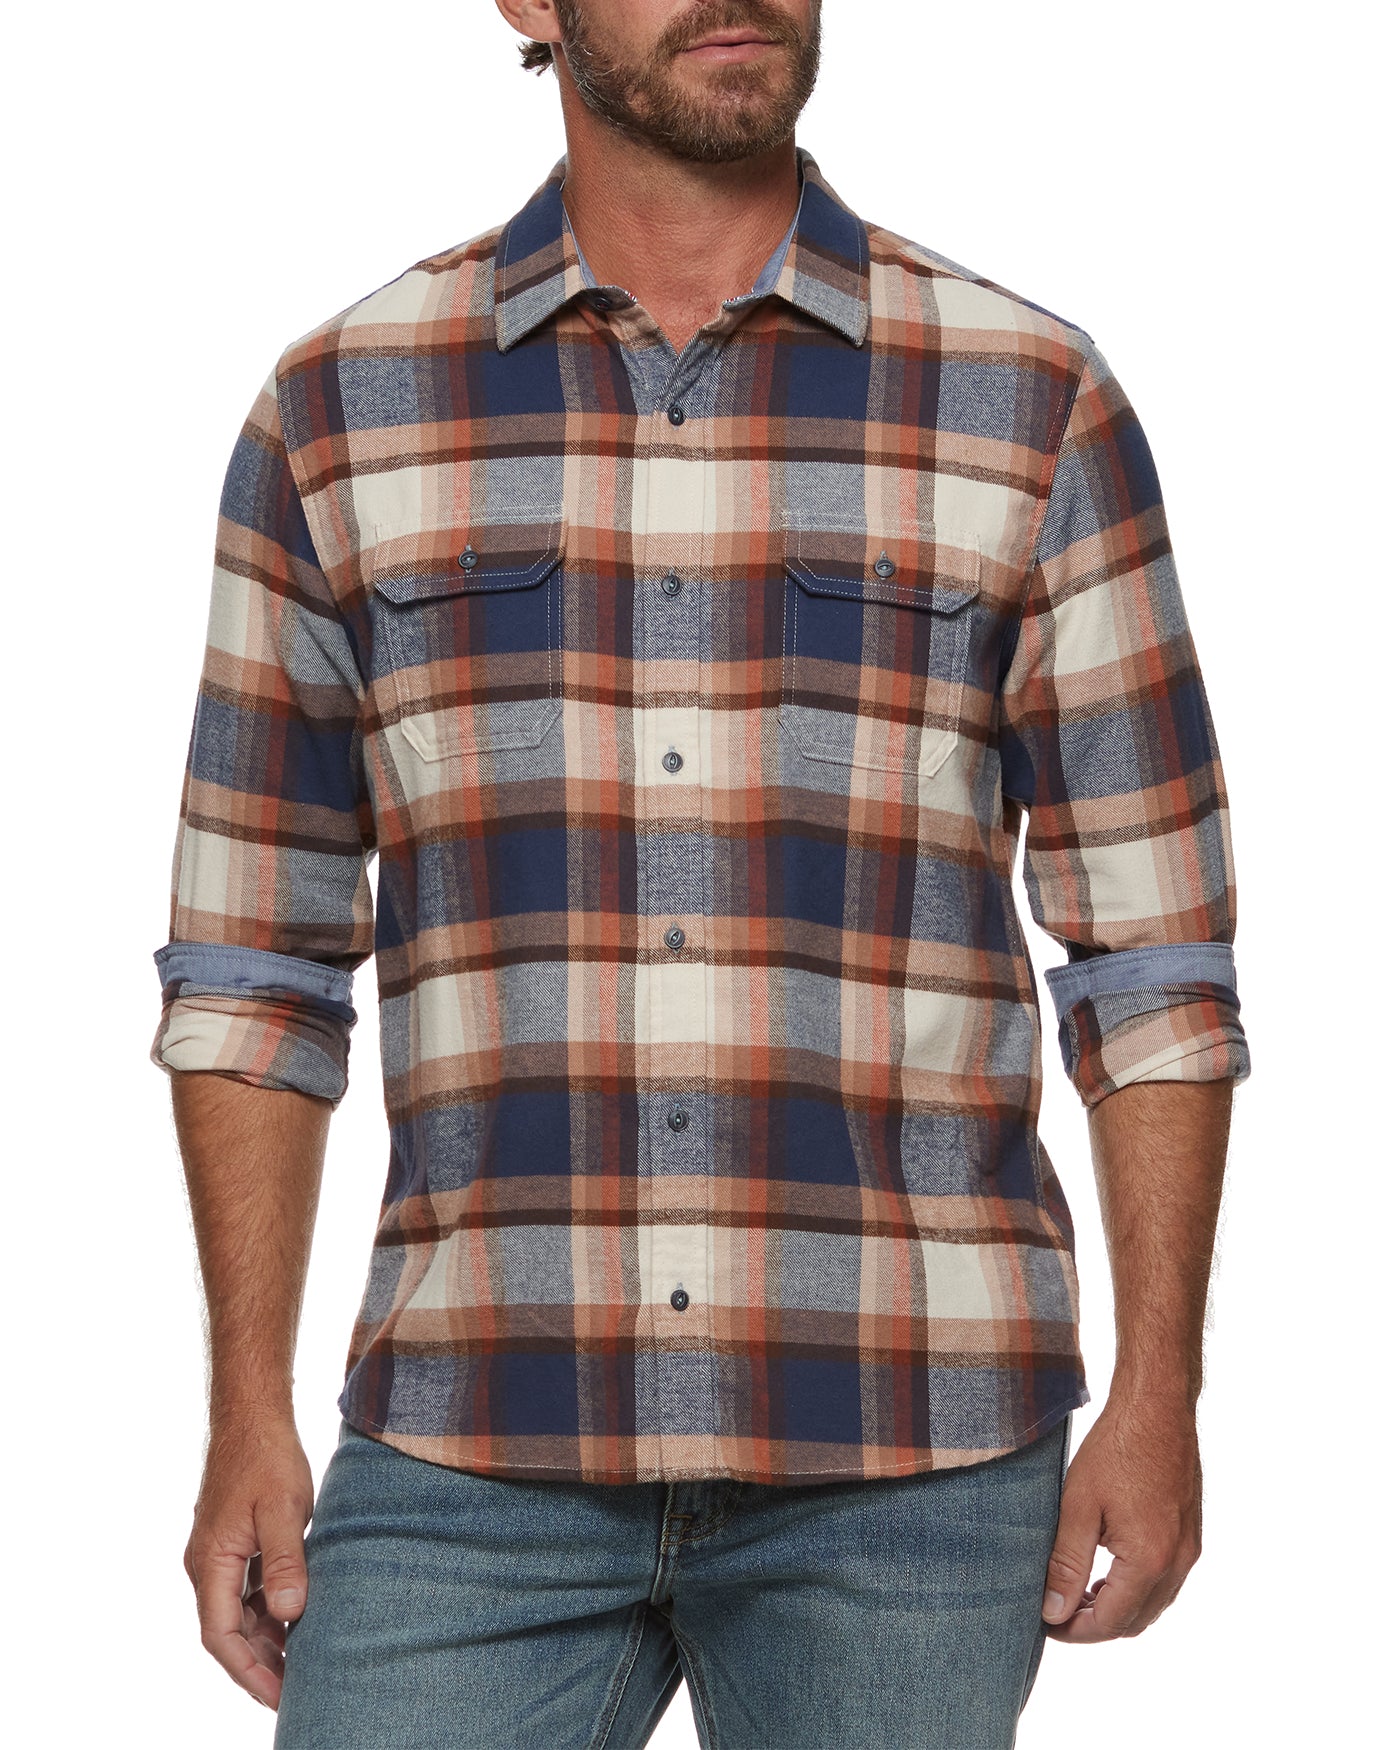 PETERS FLANNEL SHIRT